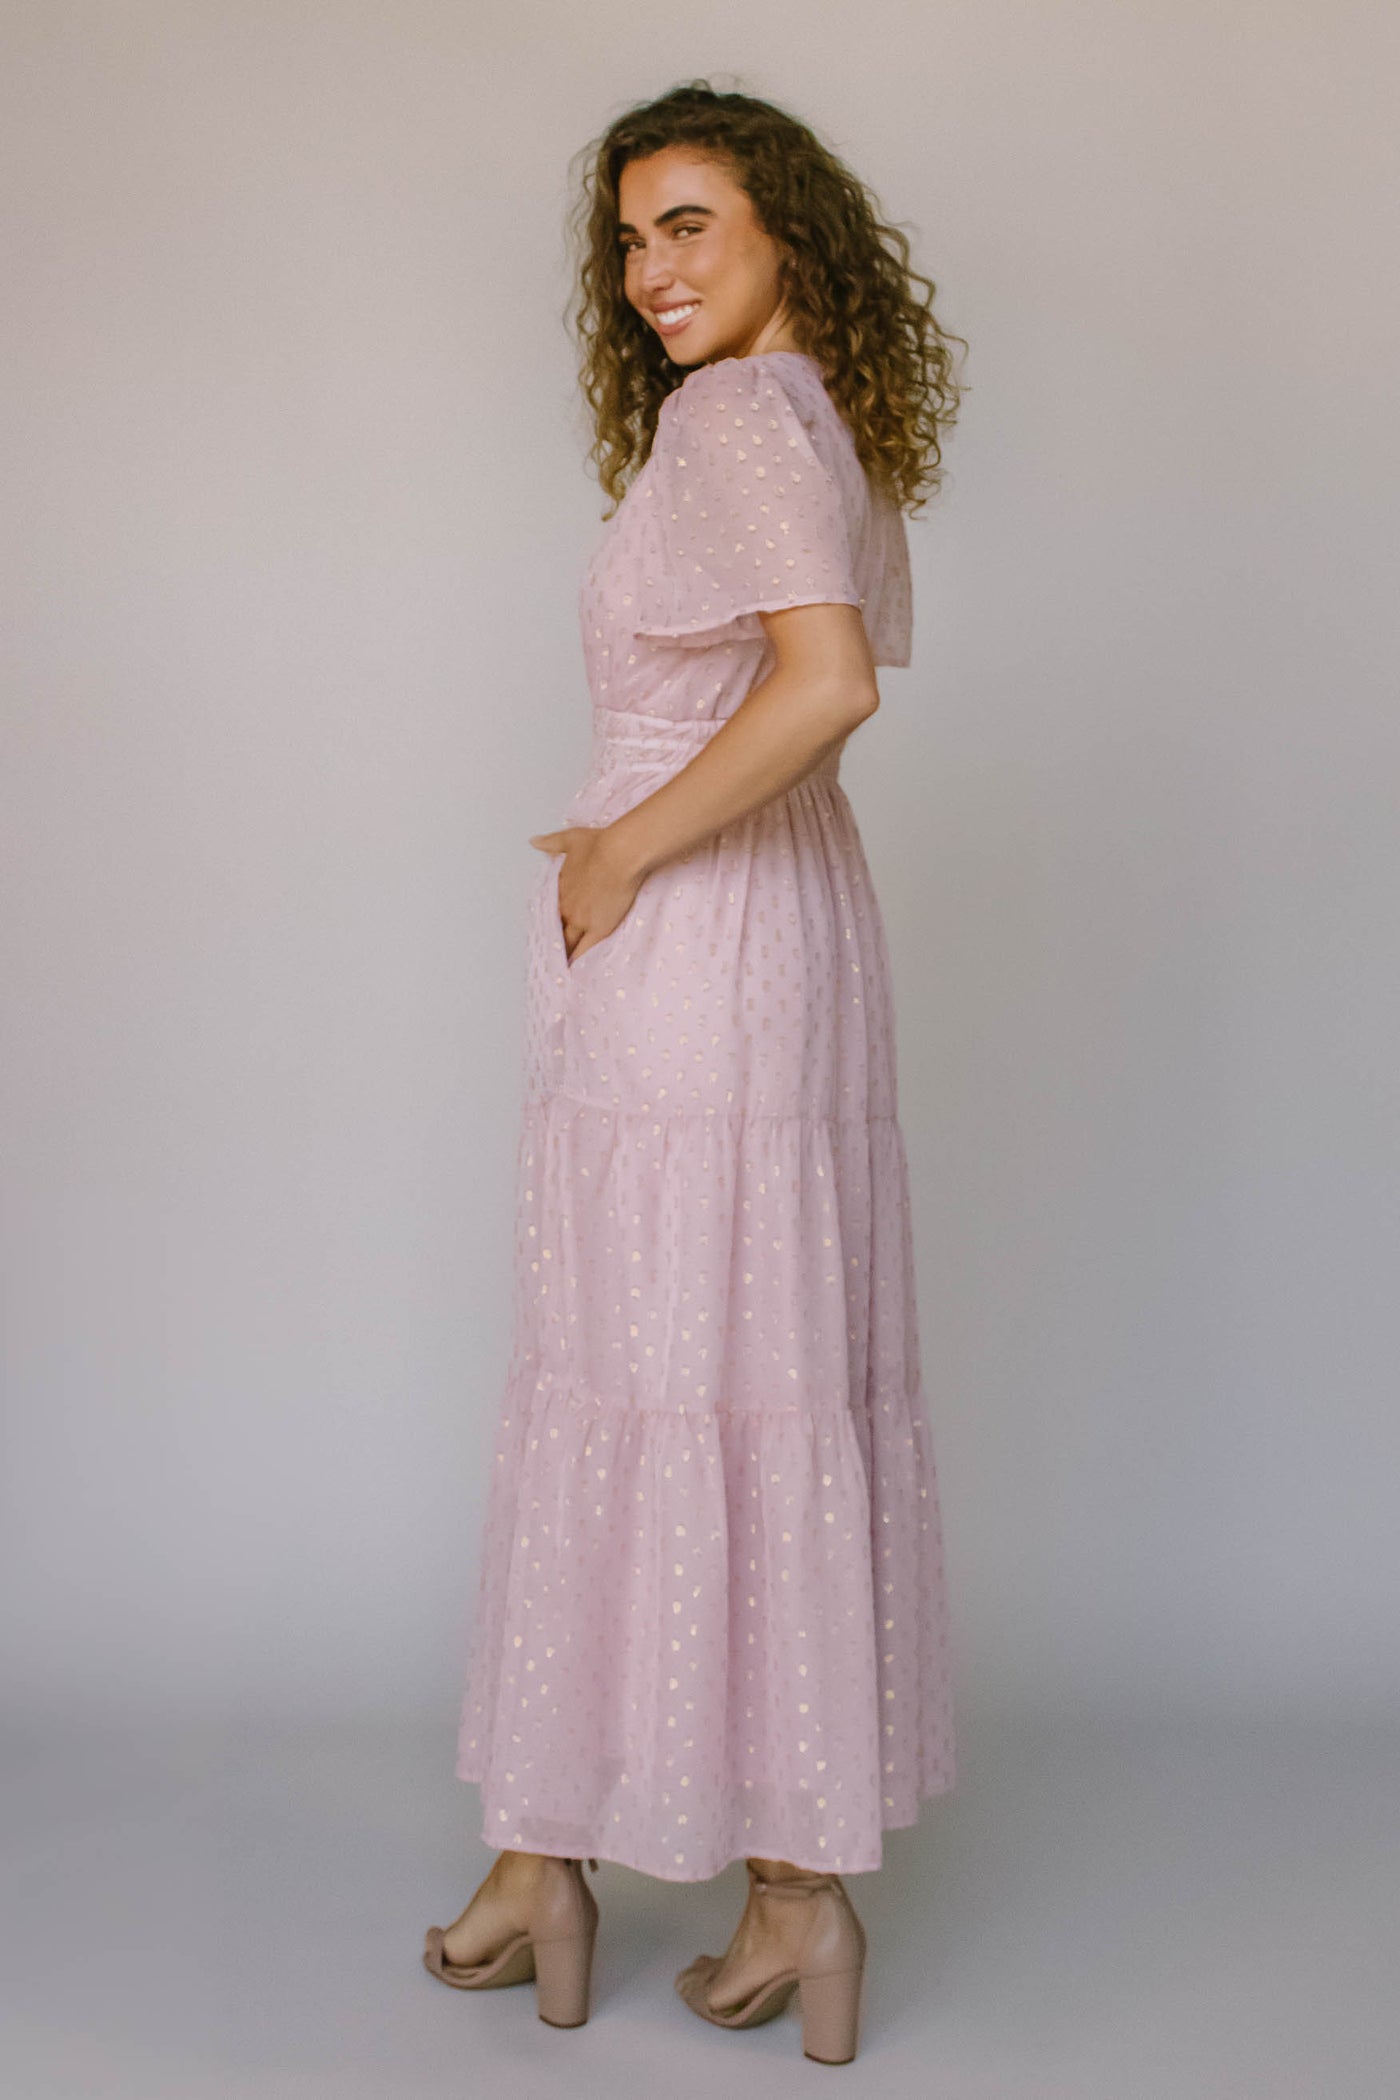 The back of a modest dress in blush pink with a gold spotted fabric, a defined waist, and flutter sleeves.